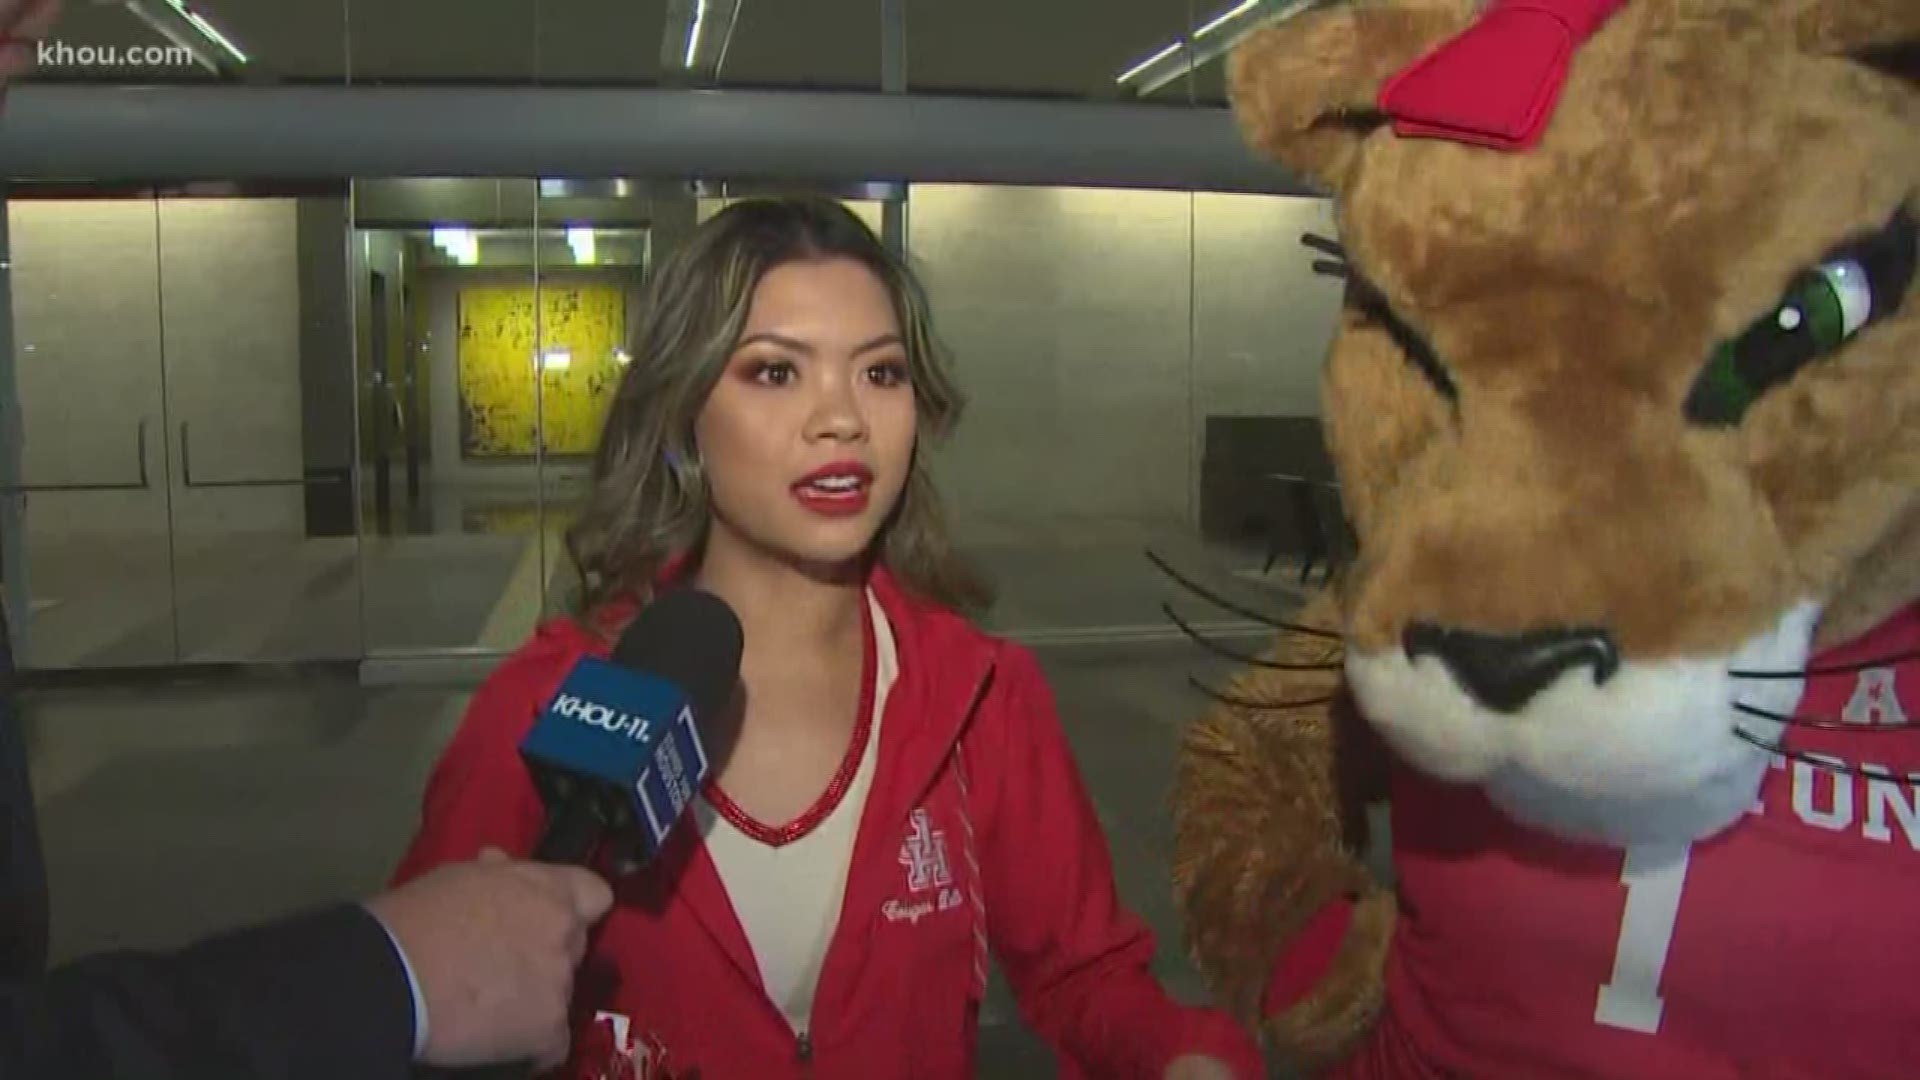 Spring break is over but March Madness is just getting started. Can you say go Coogs? UH is headed to the Big Dance and probably no one is more excited that the University of Houston Cougar Dolls Dance Team. They joined #HTownRush this morning.